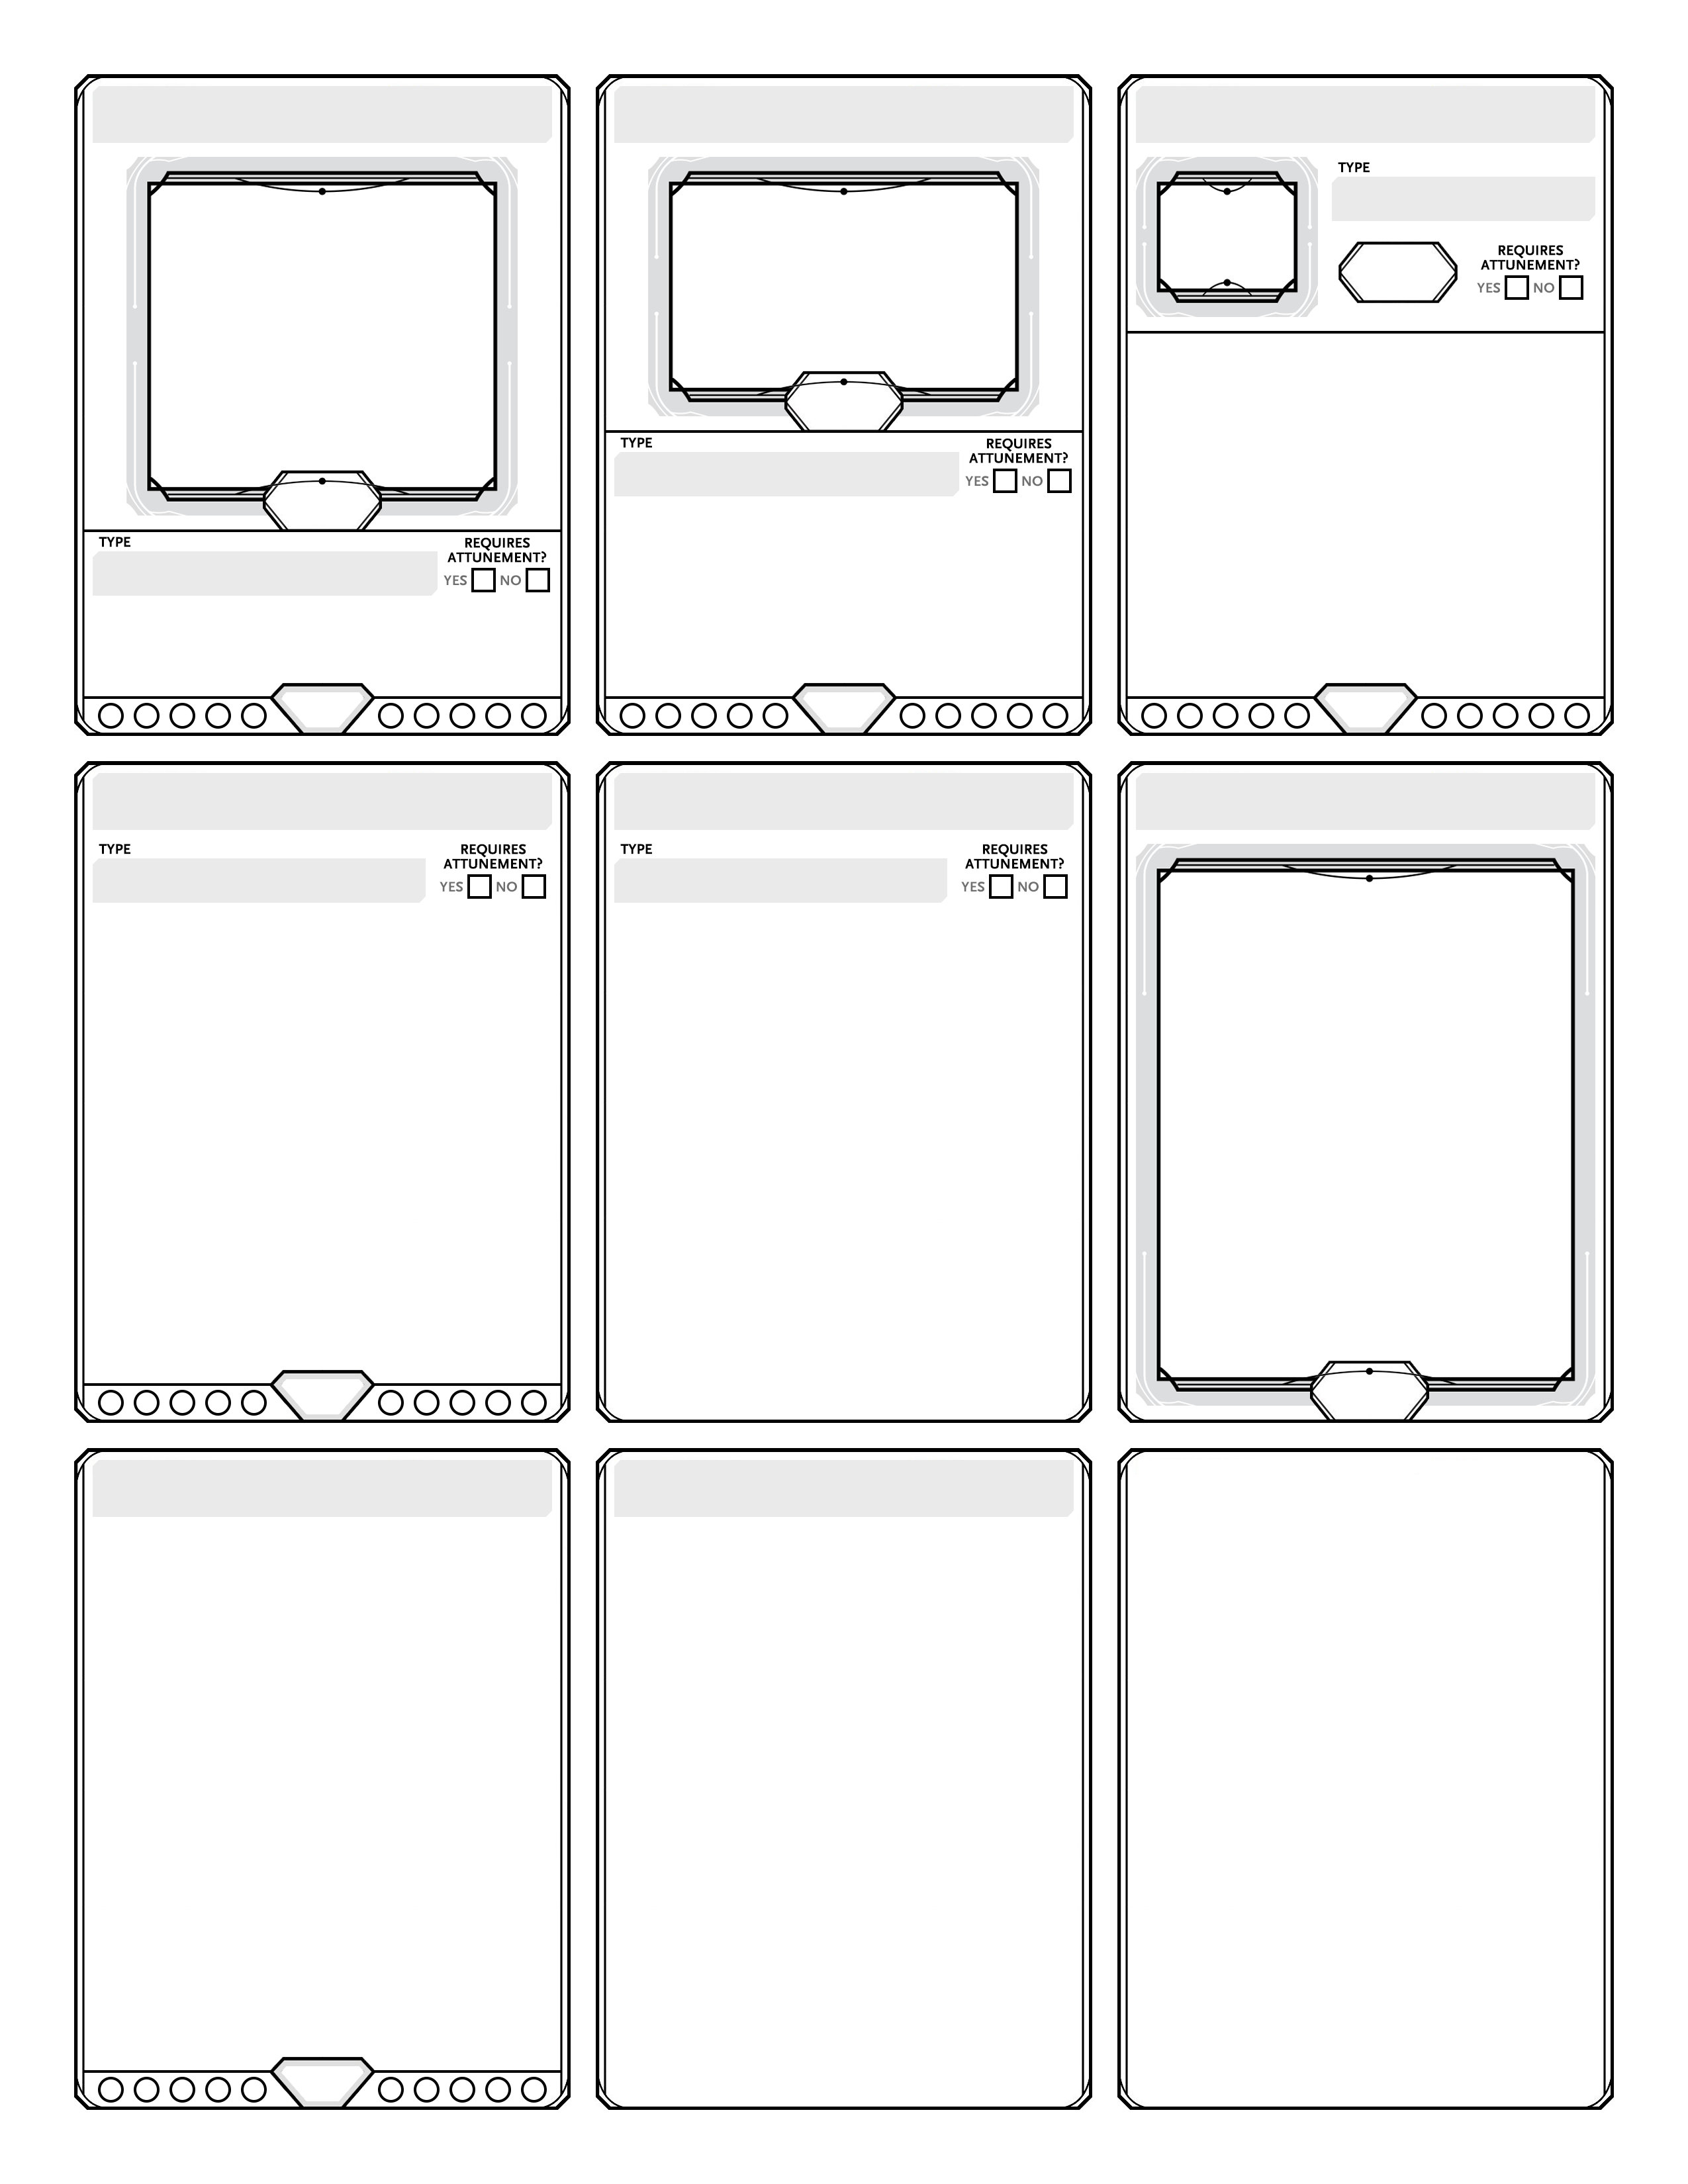 21 Blank Item Card Template 21E Templates by Item Card Template 21E For Blank Magic Card Template